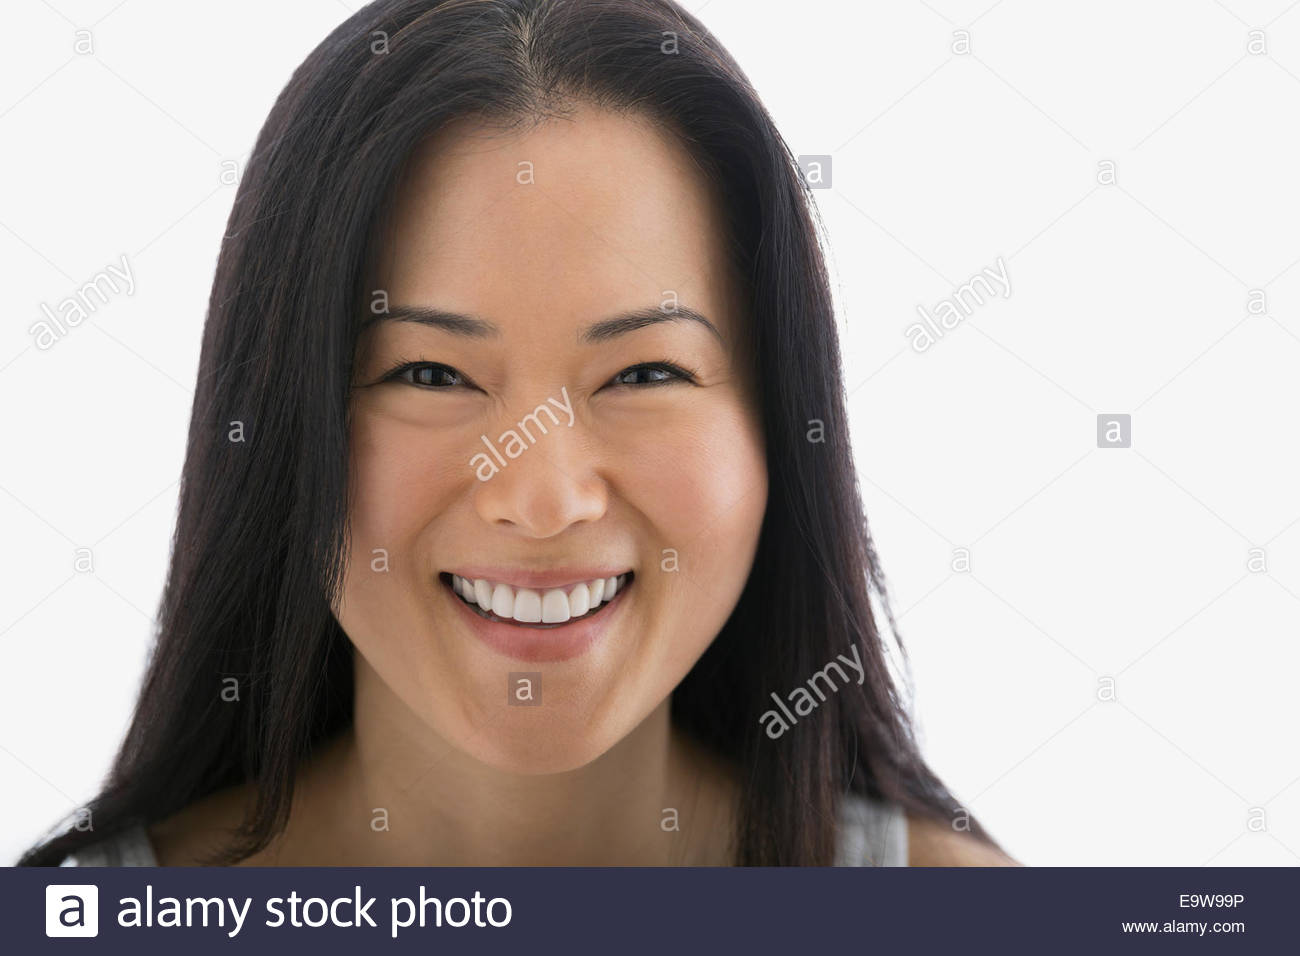 Portrait of smiling woman with black hair Stock Photo